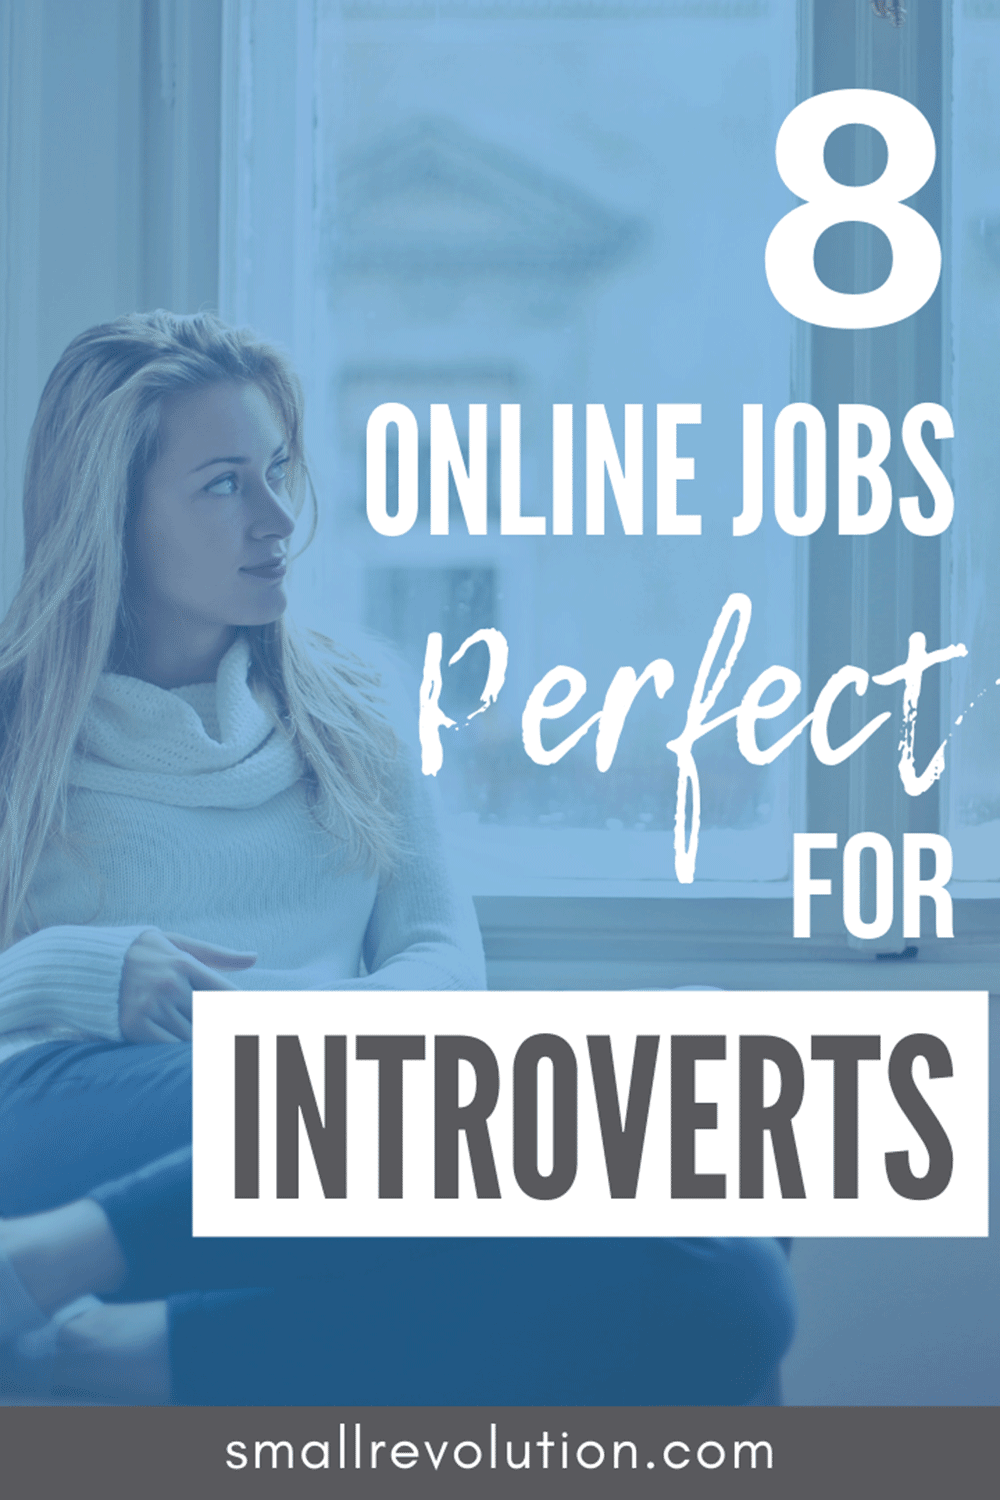 8 Online Jobs Perfect for Introverts